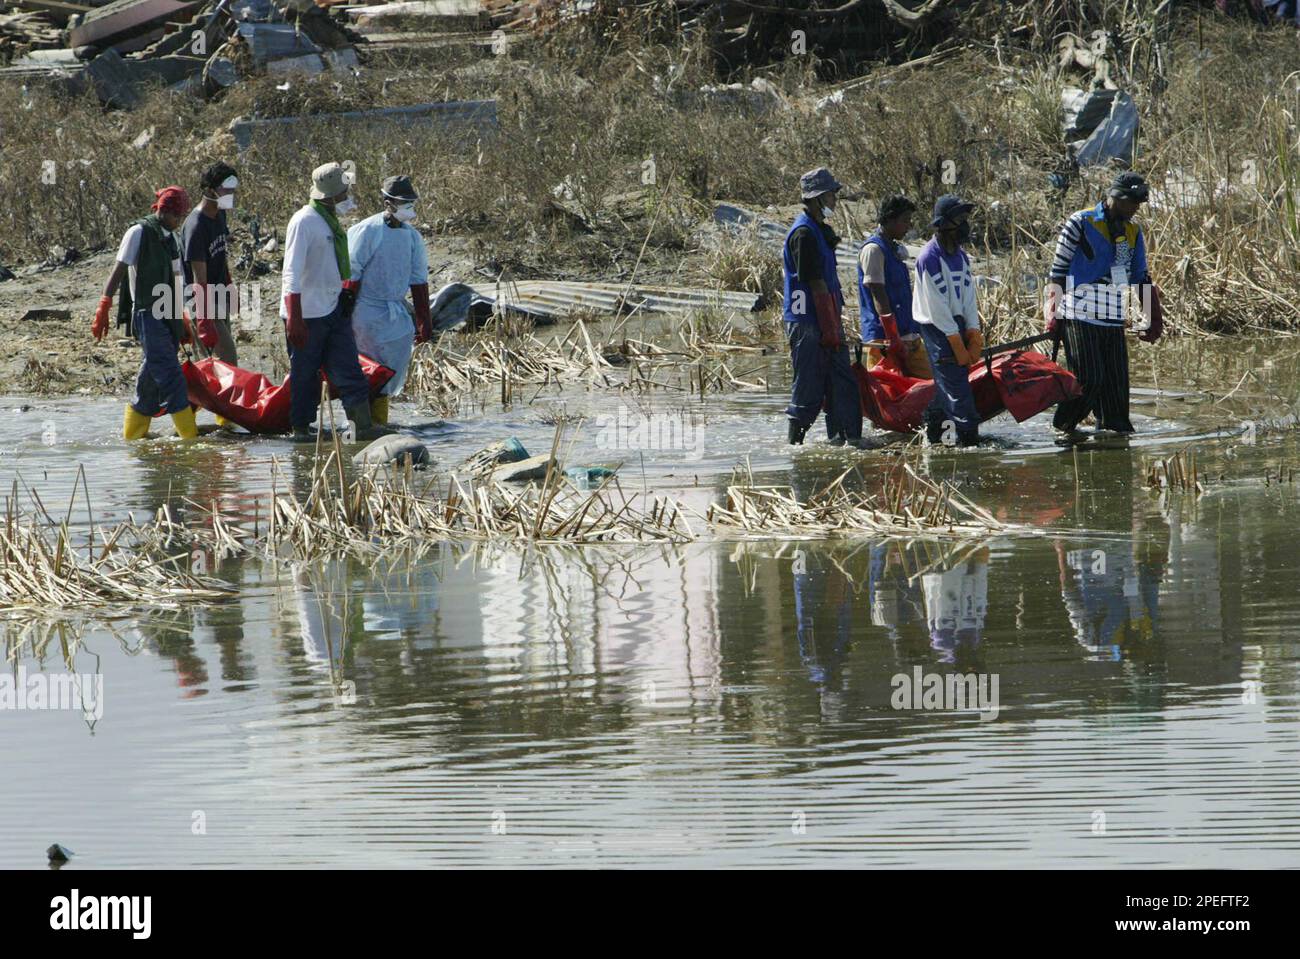 Survivors and volunteers wade through a pool of water as they